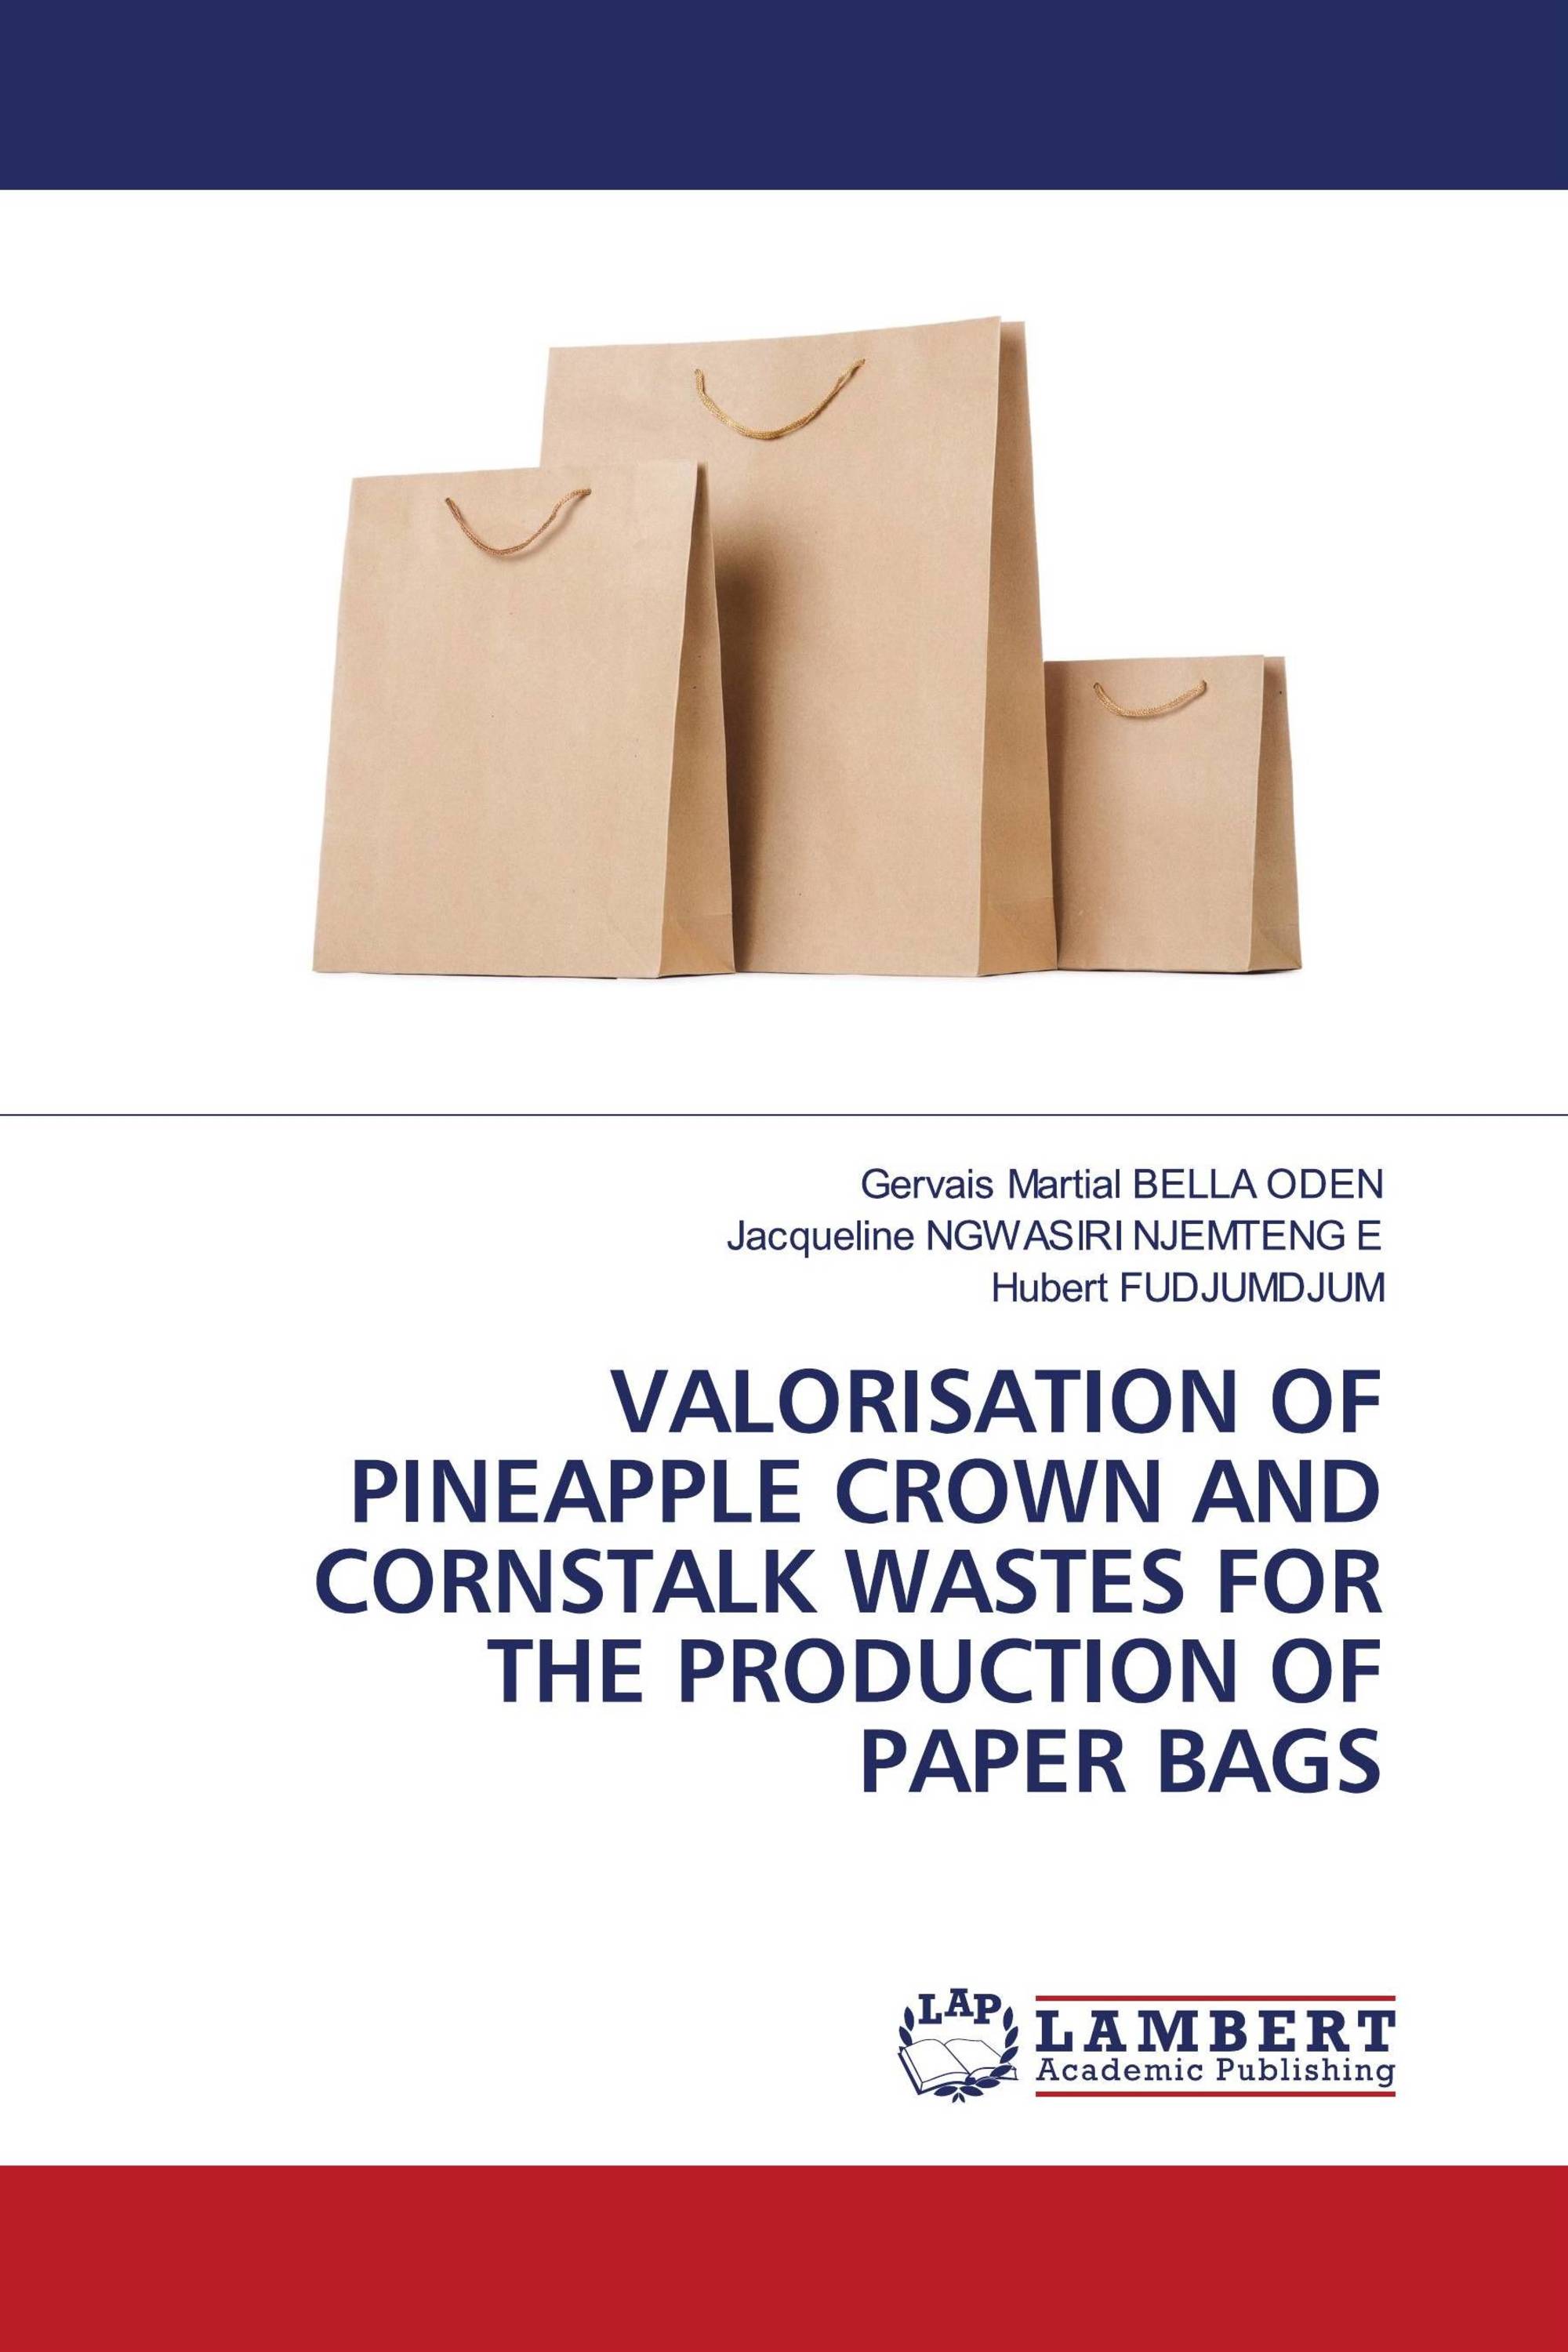 VALORISATION OF PINEAPPLE CROWN AND CORNSTALK WASTES FOR THE PRODUCTION OF PAPER BAGS